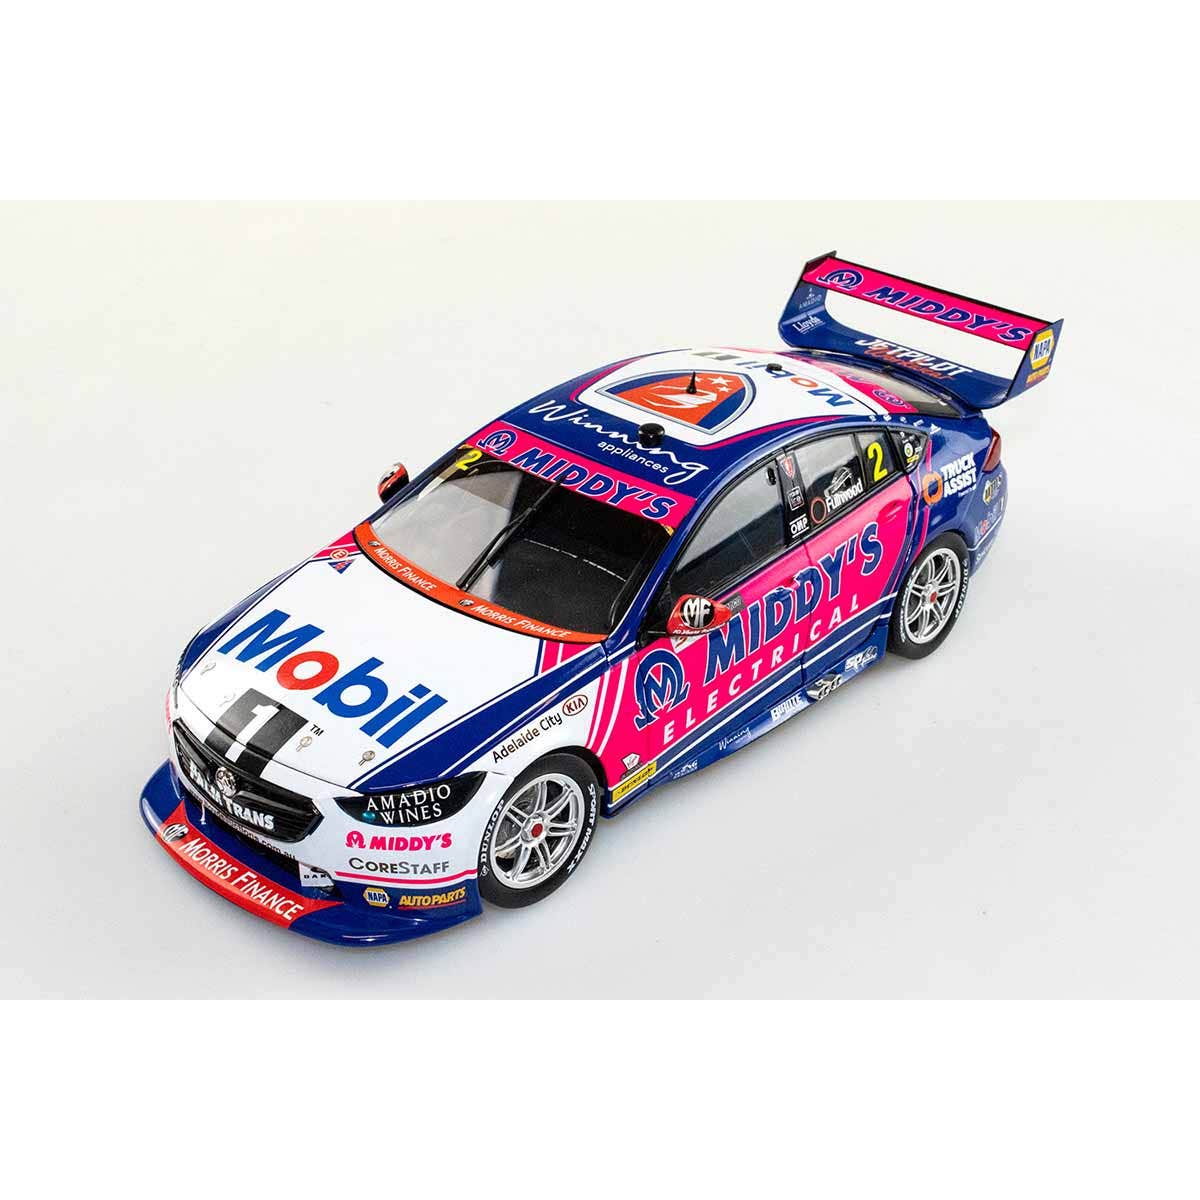 Holden ZB Commodore - Mobil 1 Middy's Racing - #2, B.Fullwood - 3rd place, Race 25, Repco SuperSprint The Bend - 1:18 Scale Diecast Model Car